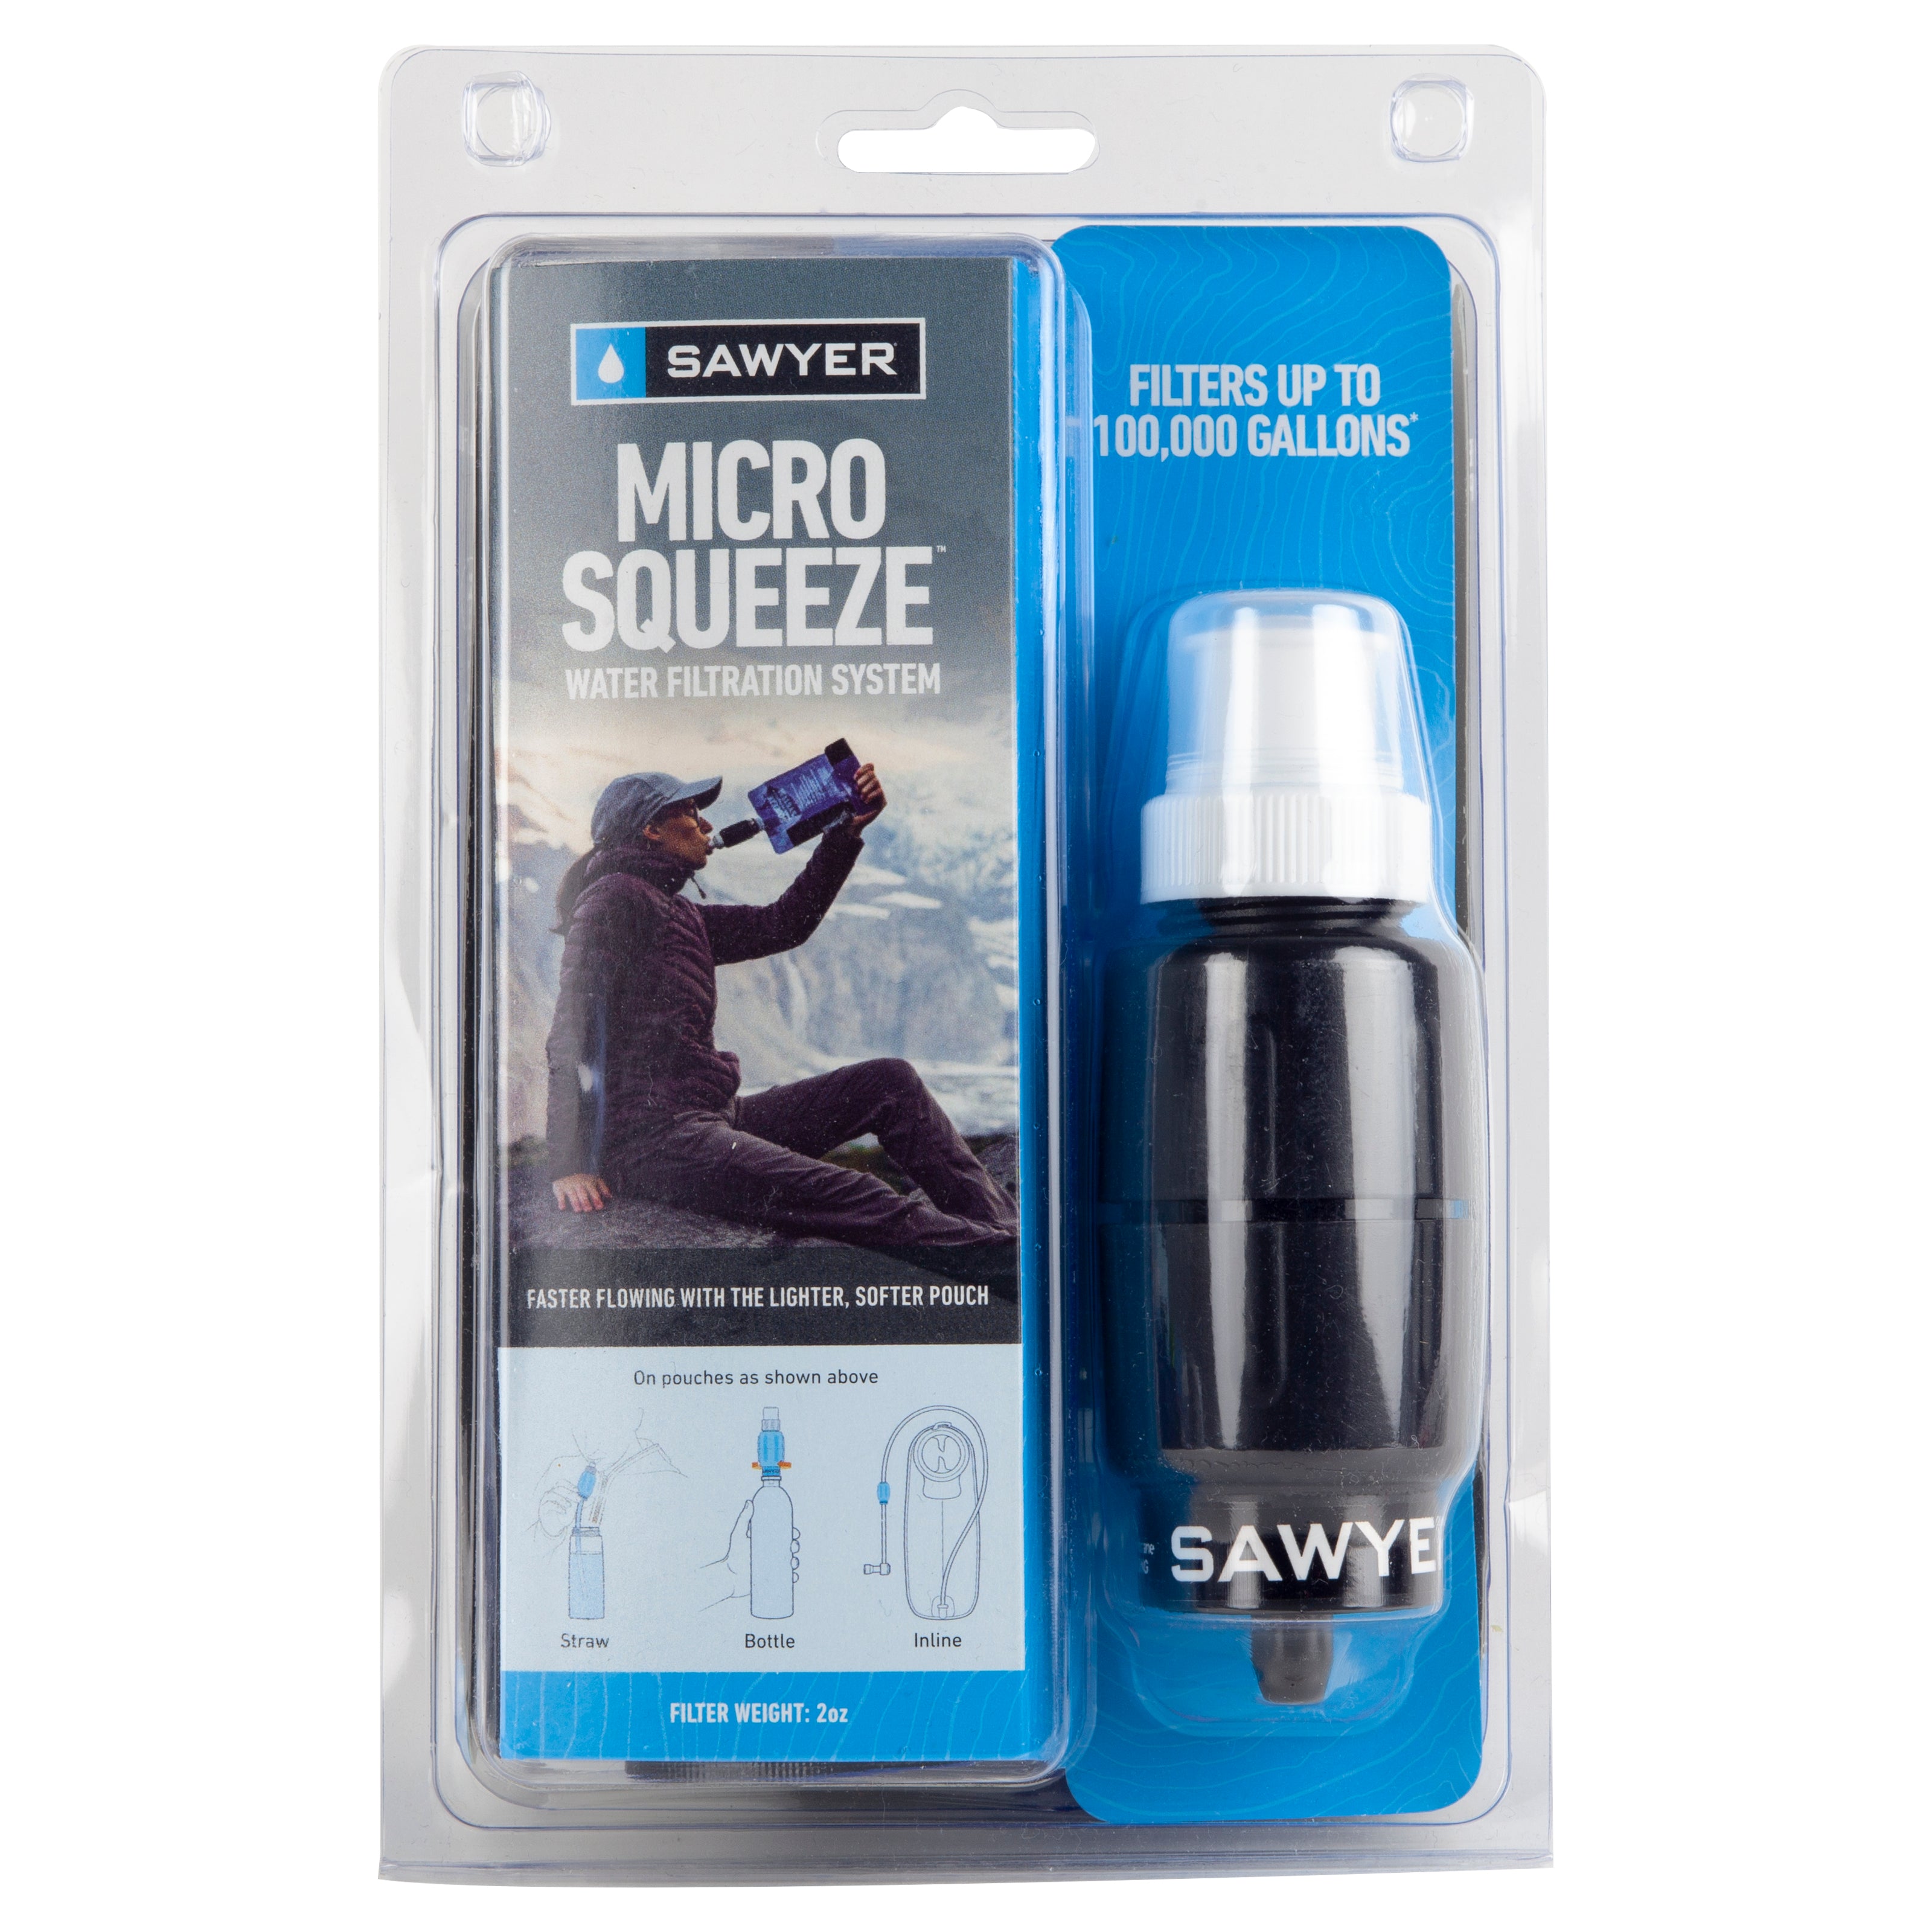 Sawyer Micro Squeeze in packaging